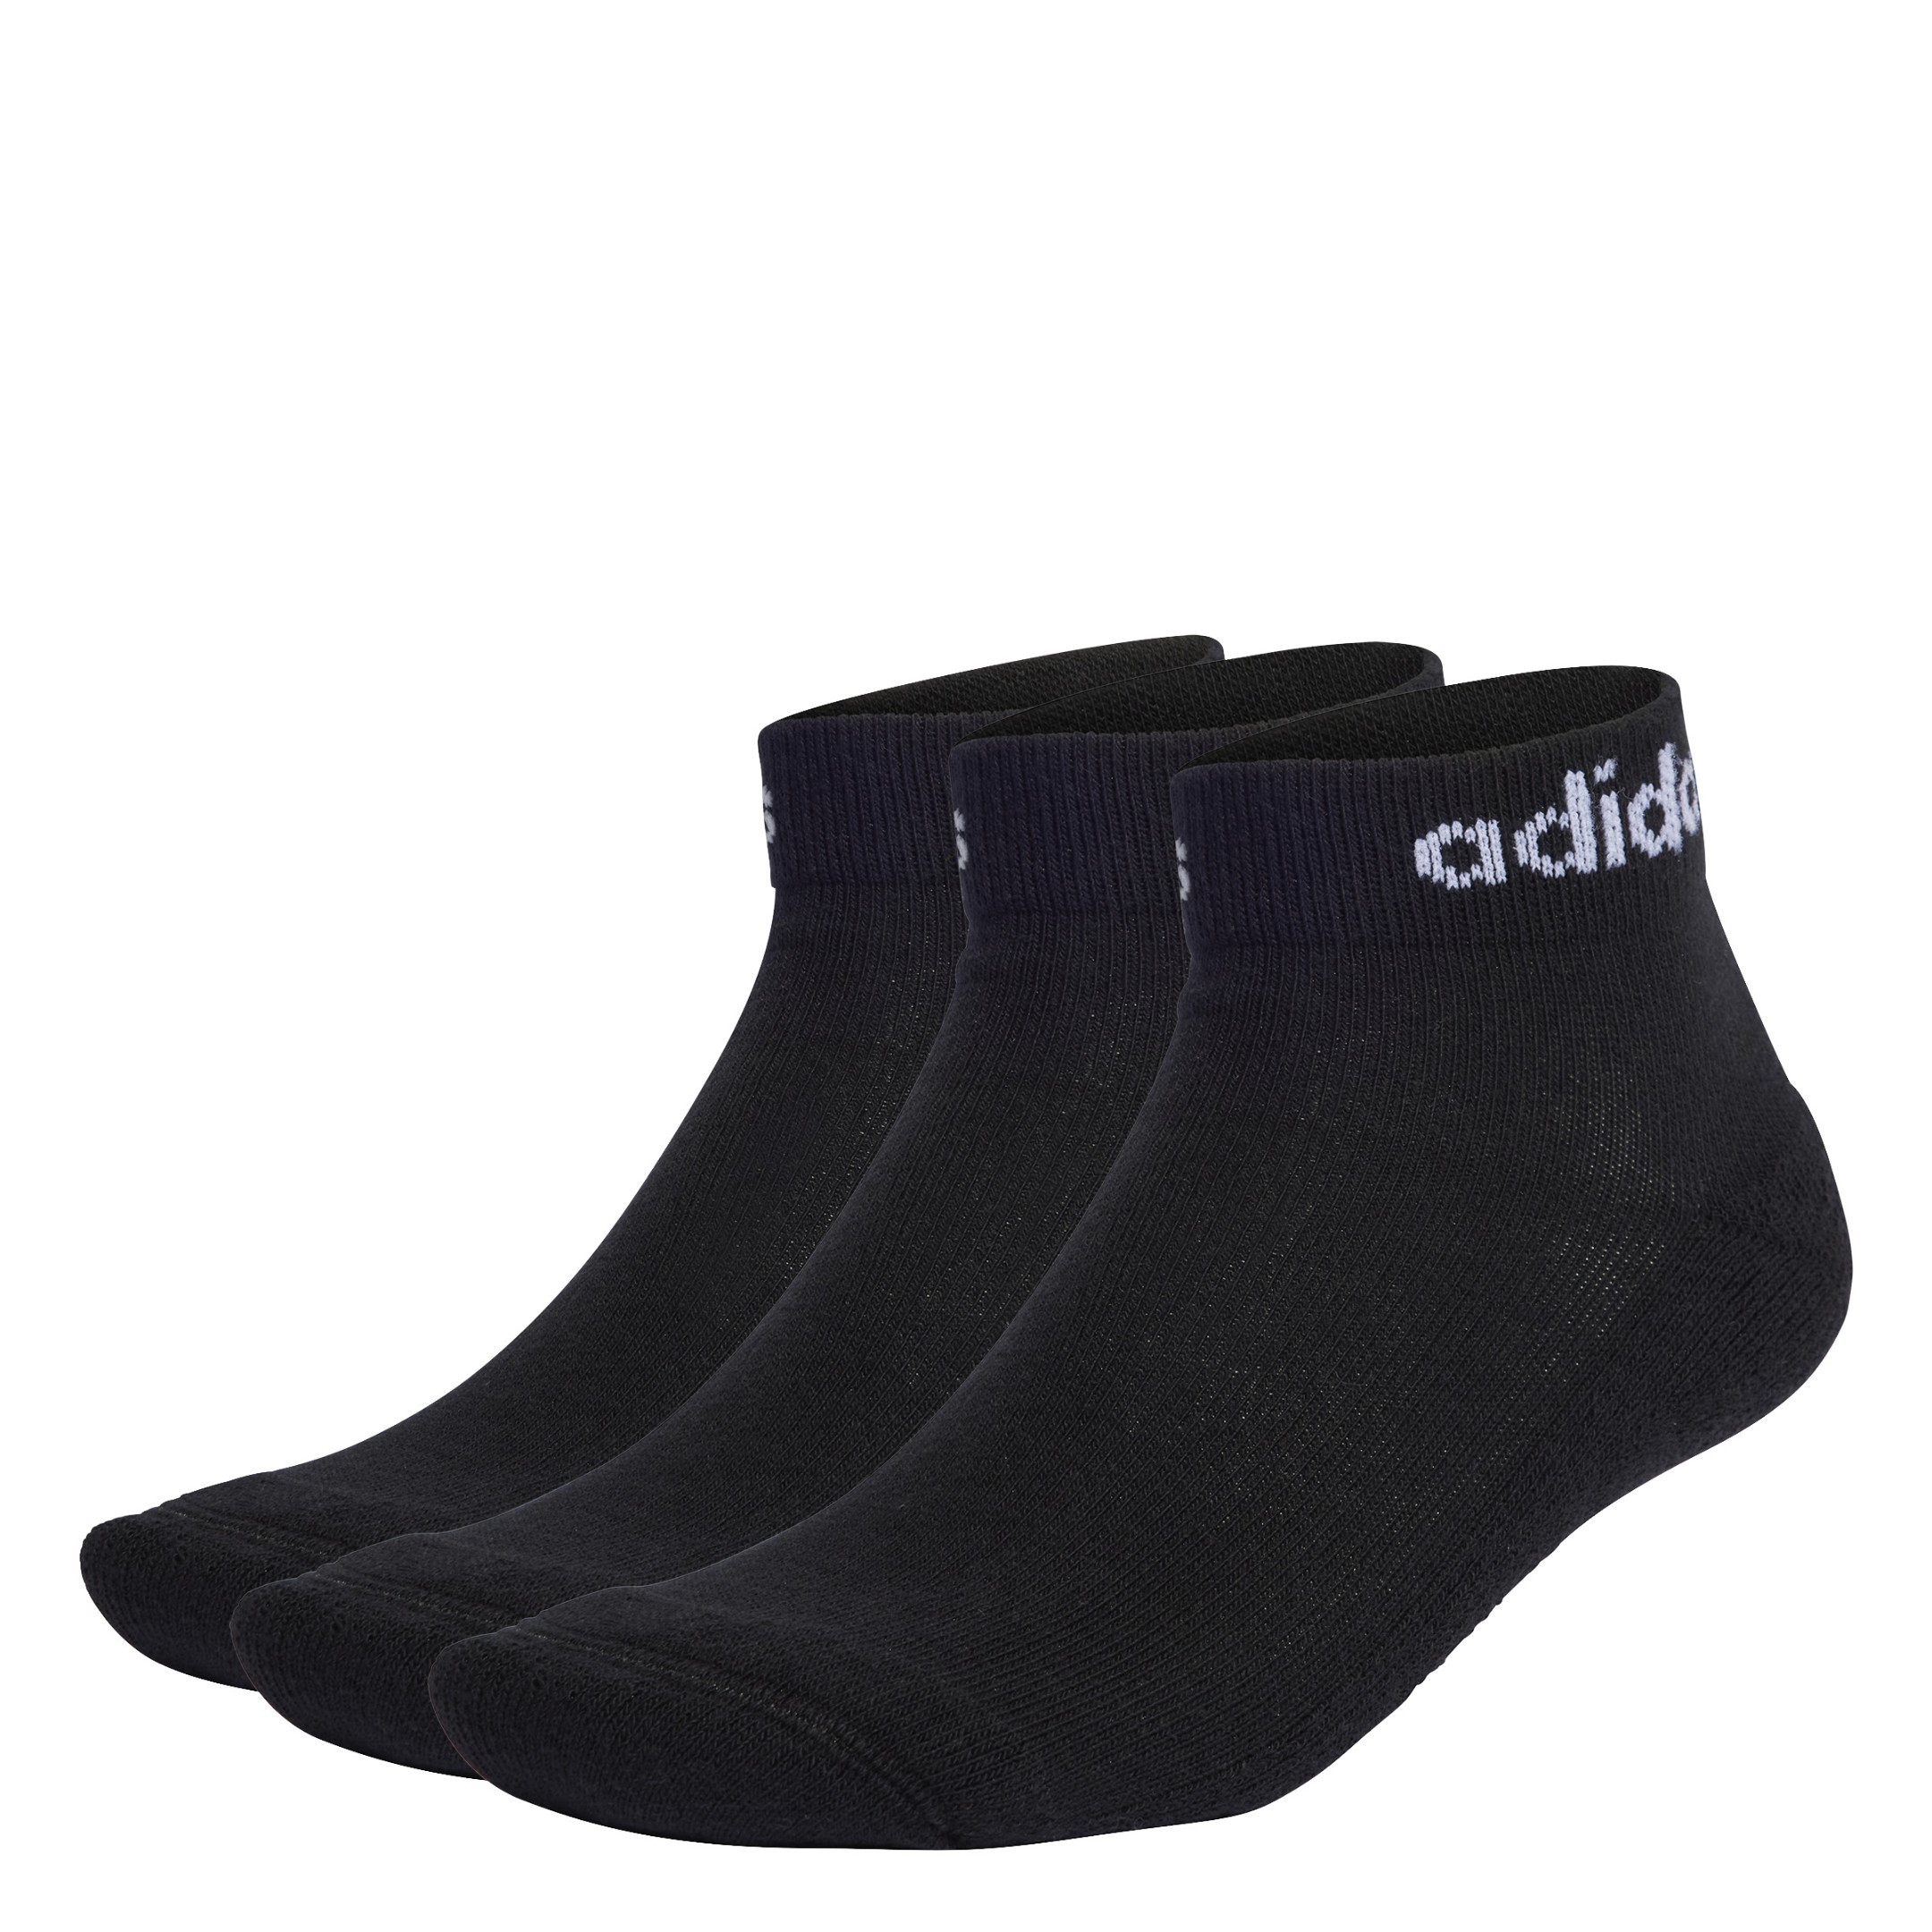 CALCETINES TOBILLEROS LINEAR CUSHIONED NEGRO / BLANCO